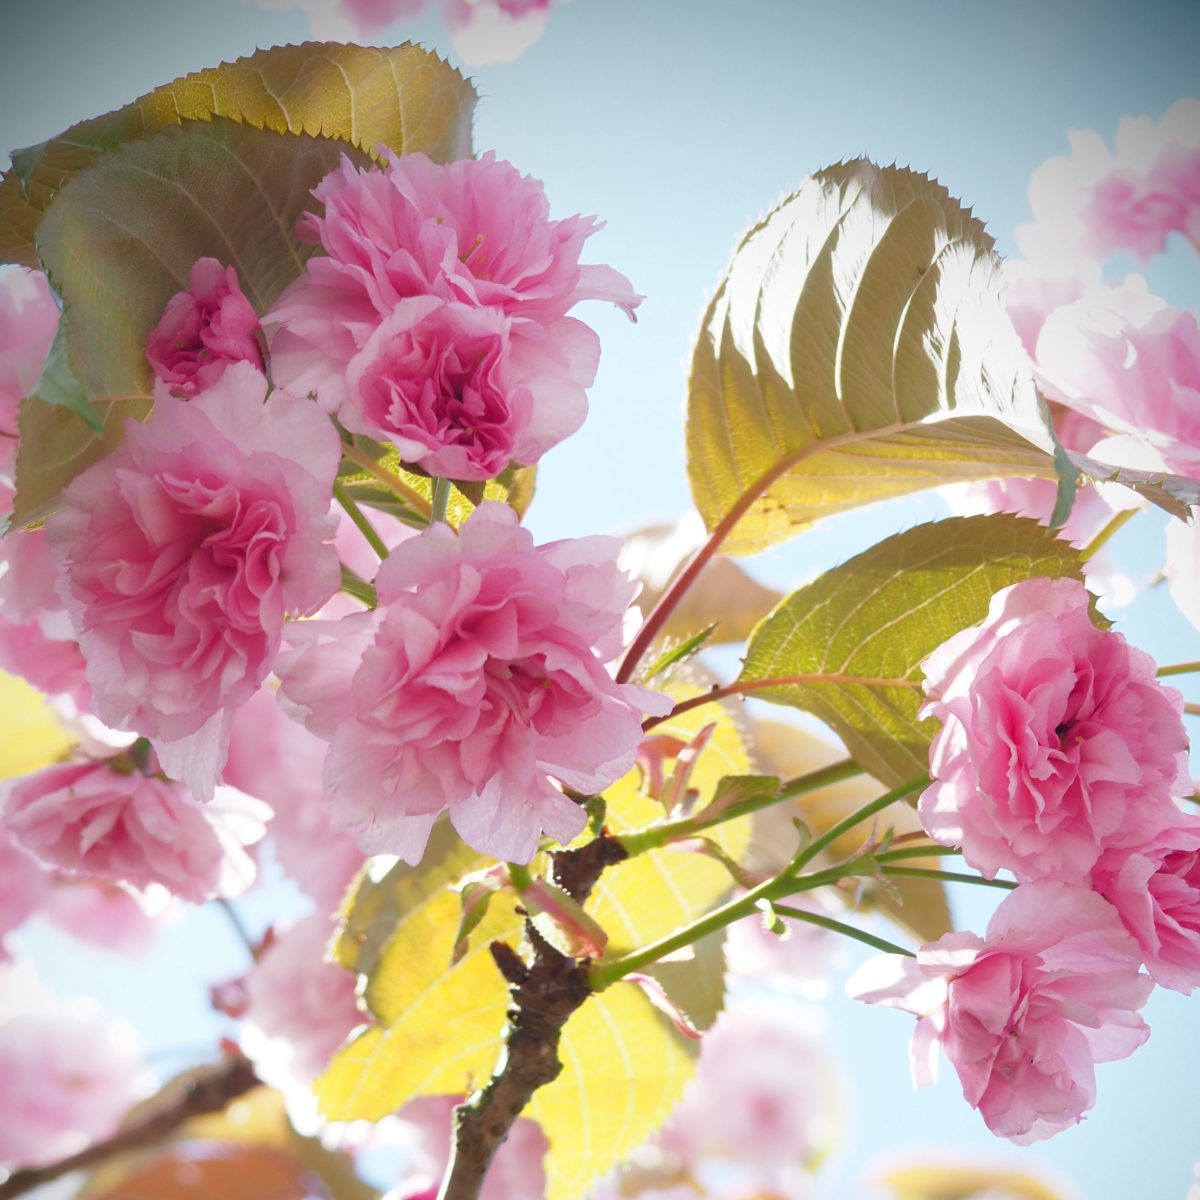 Pretty in Pink: Cherry Blossom Photography & Symbology